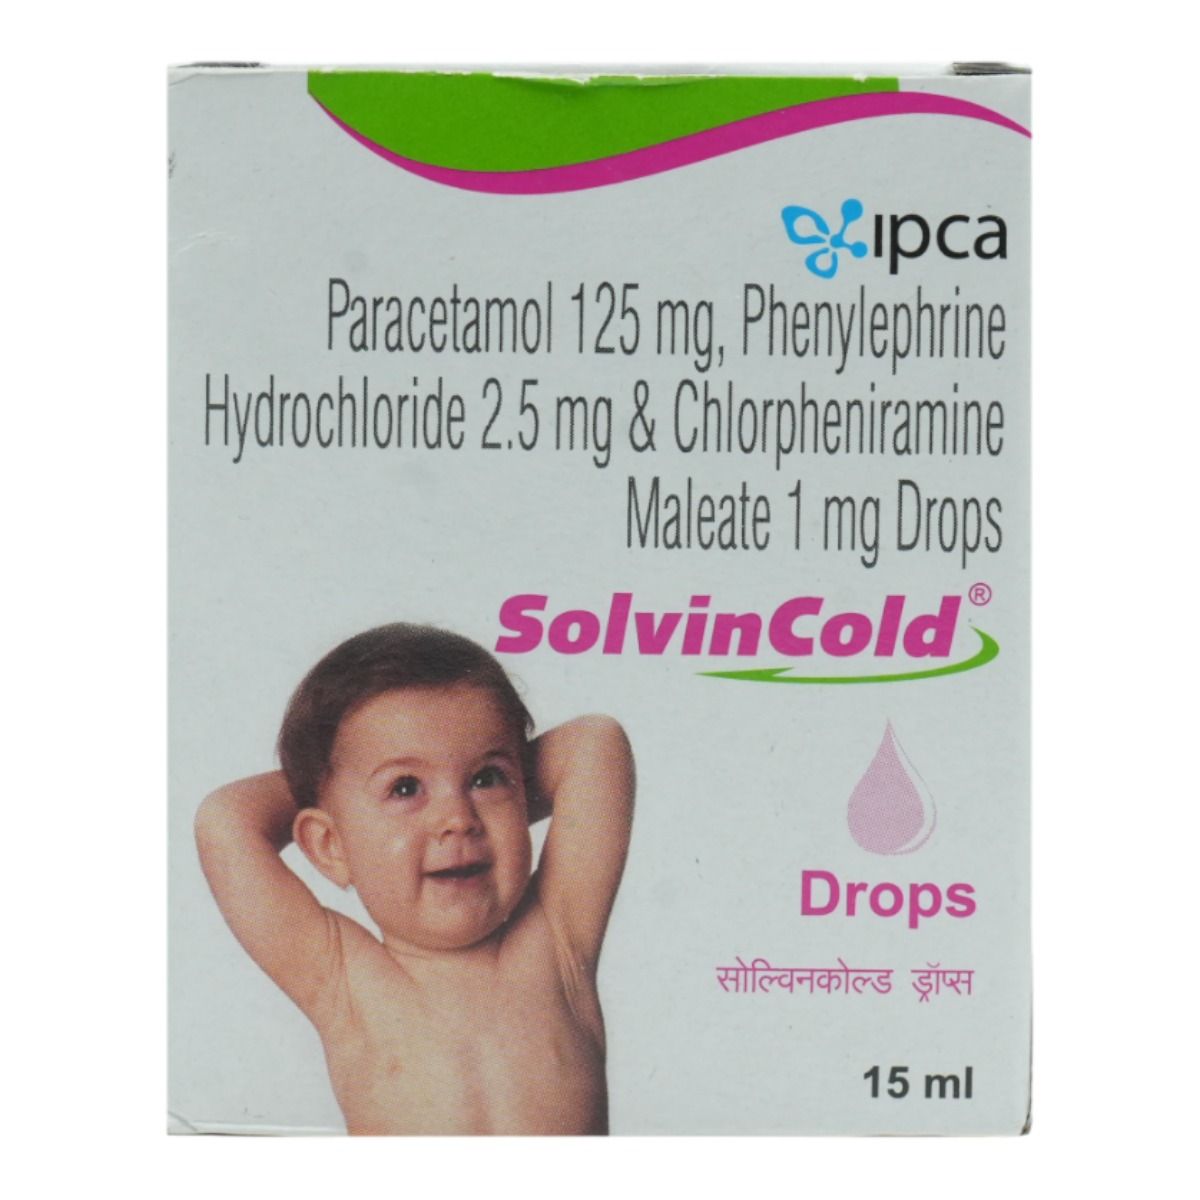 Solvin Cold Drop 15 ml, Pack of 1 Drops